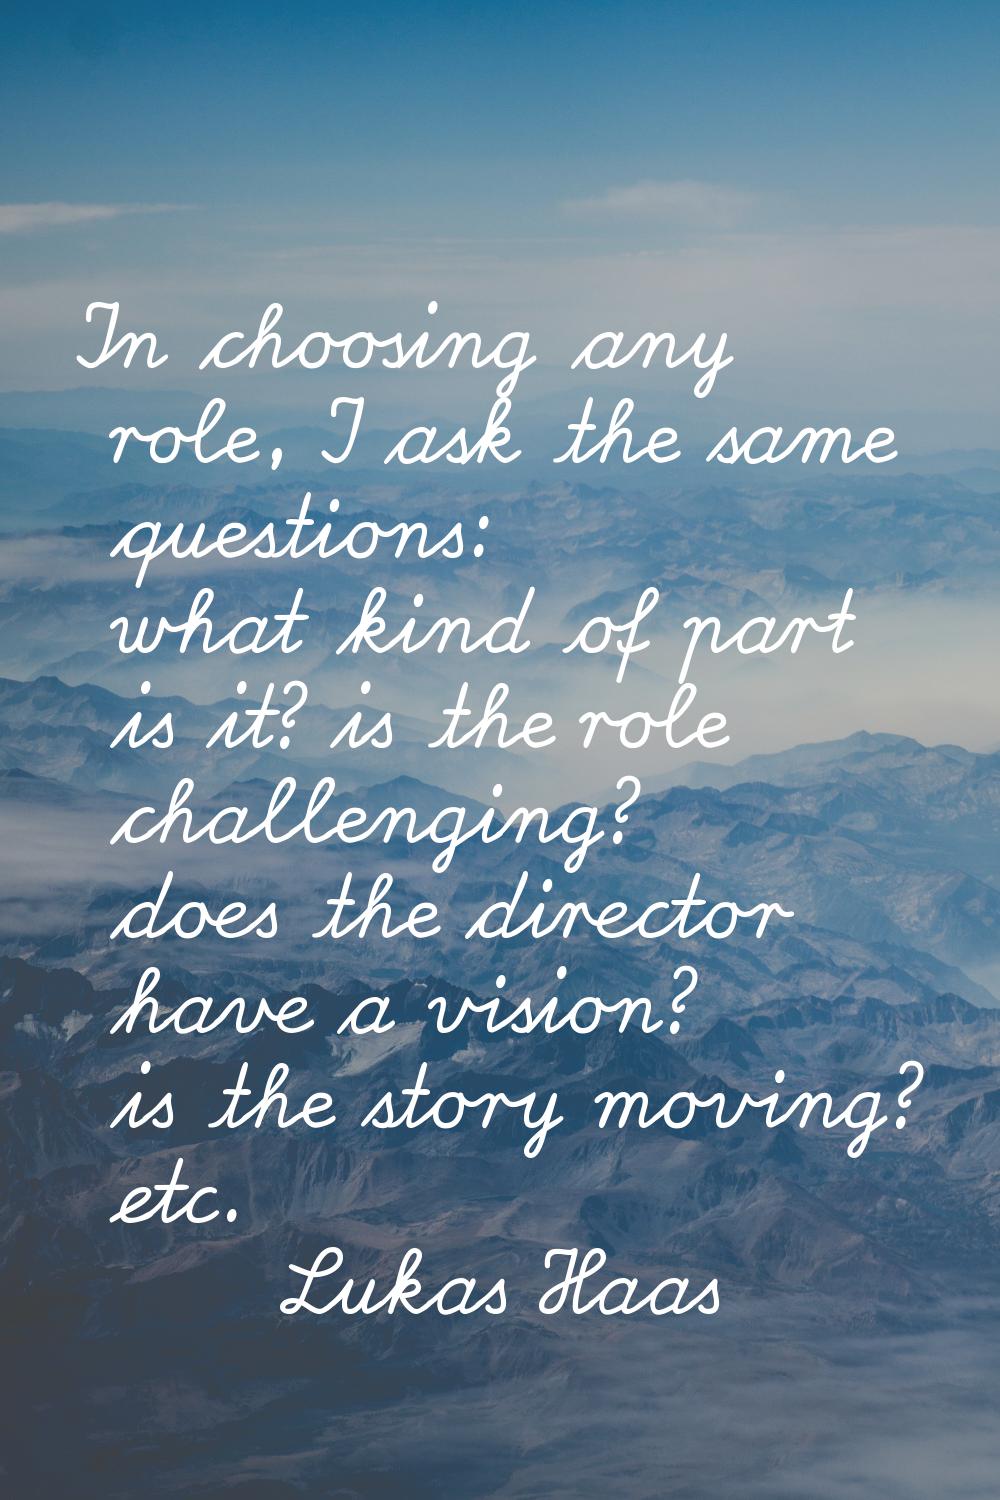 In choosing any role, I ask the same questions: what kind of part is it? is the role challenging? d